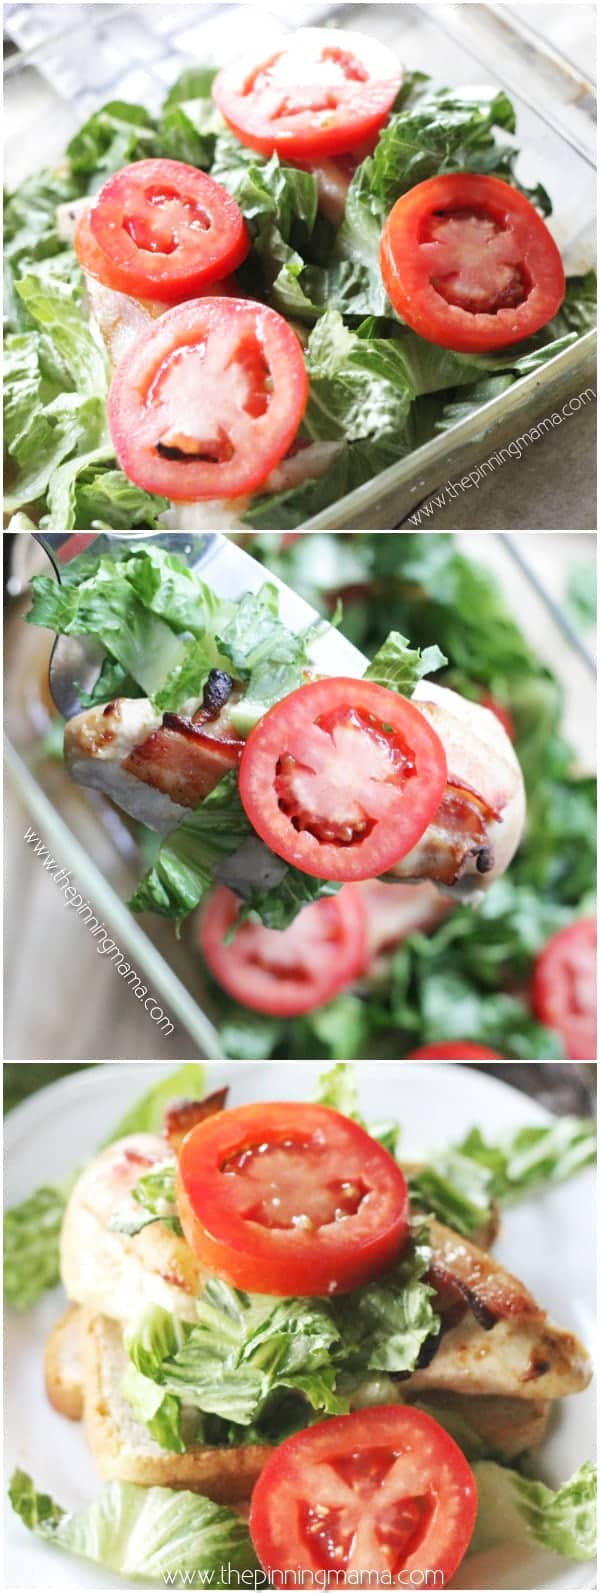 Quick + Easy + Healthy = BEST DINNER EVER! BLT Chicken Bake - Bacon, lettuce, tomato and ranch layered onto wholesome chicken breast. YUM!